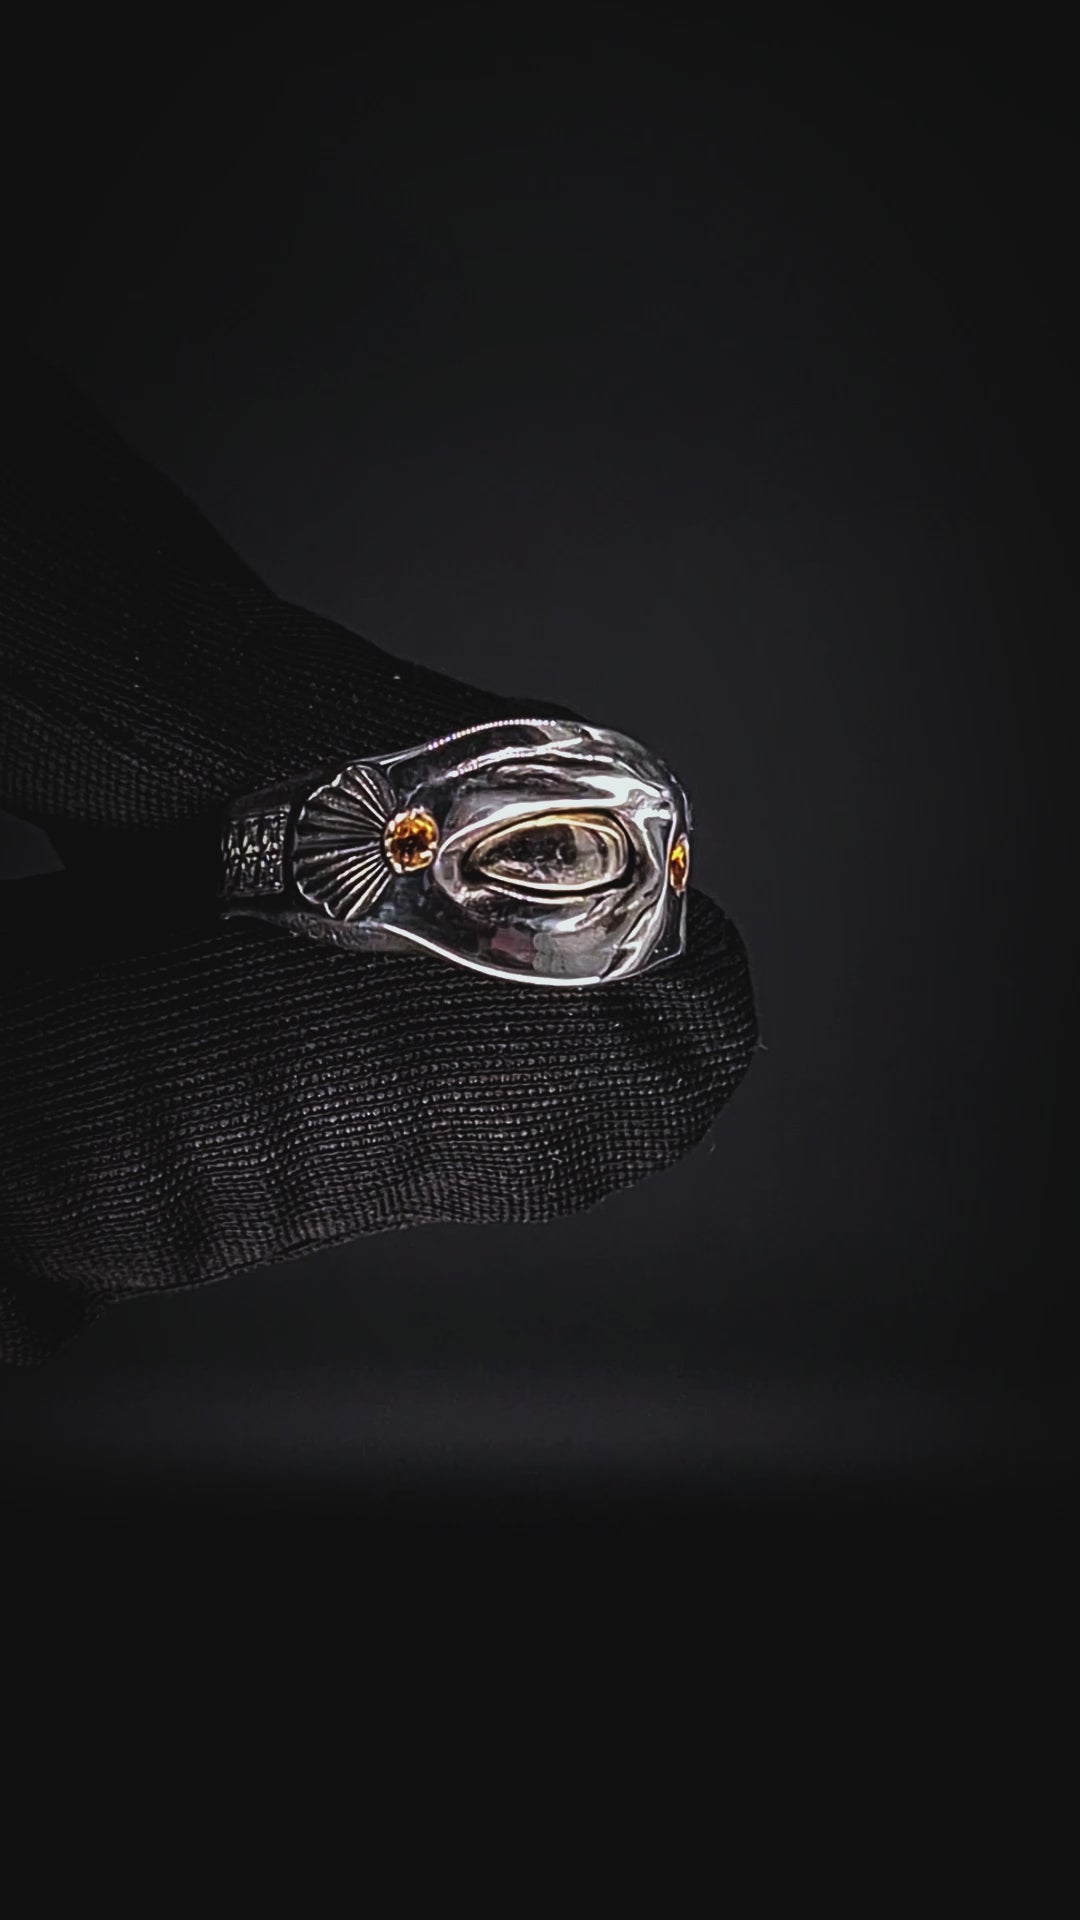 providentia eye ring made from sterling silver, sapphire stone eyes, blinking kinetic moving jewelry video